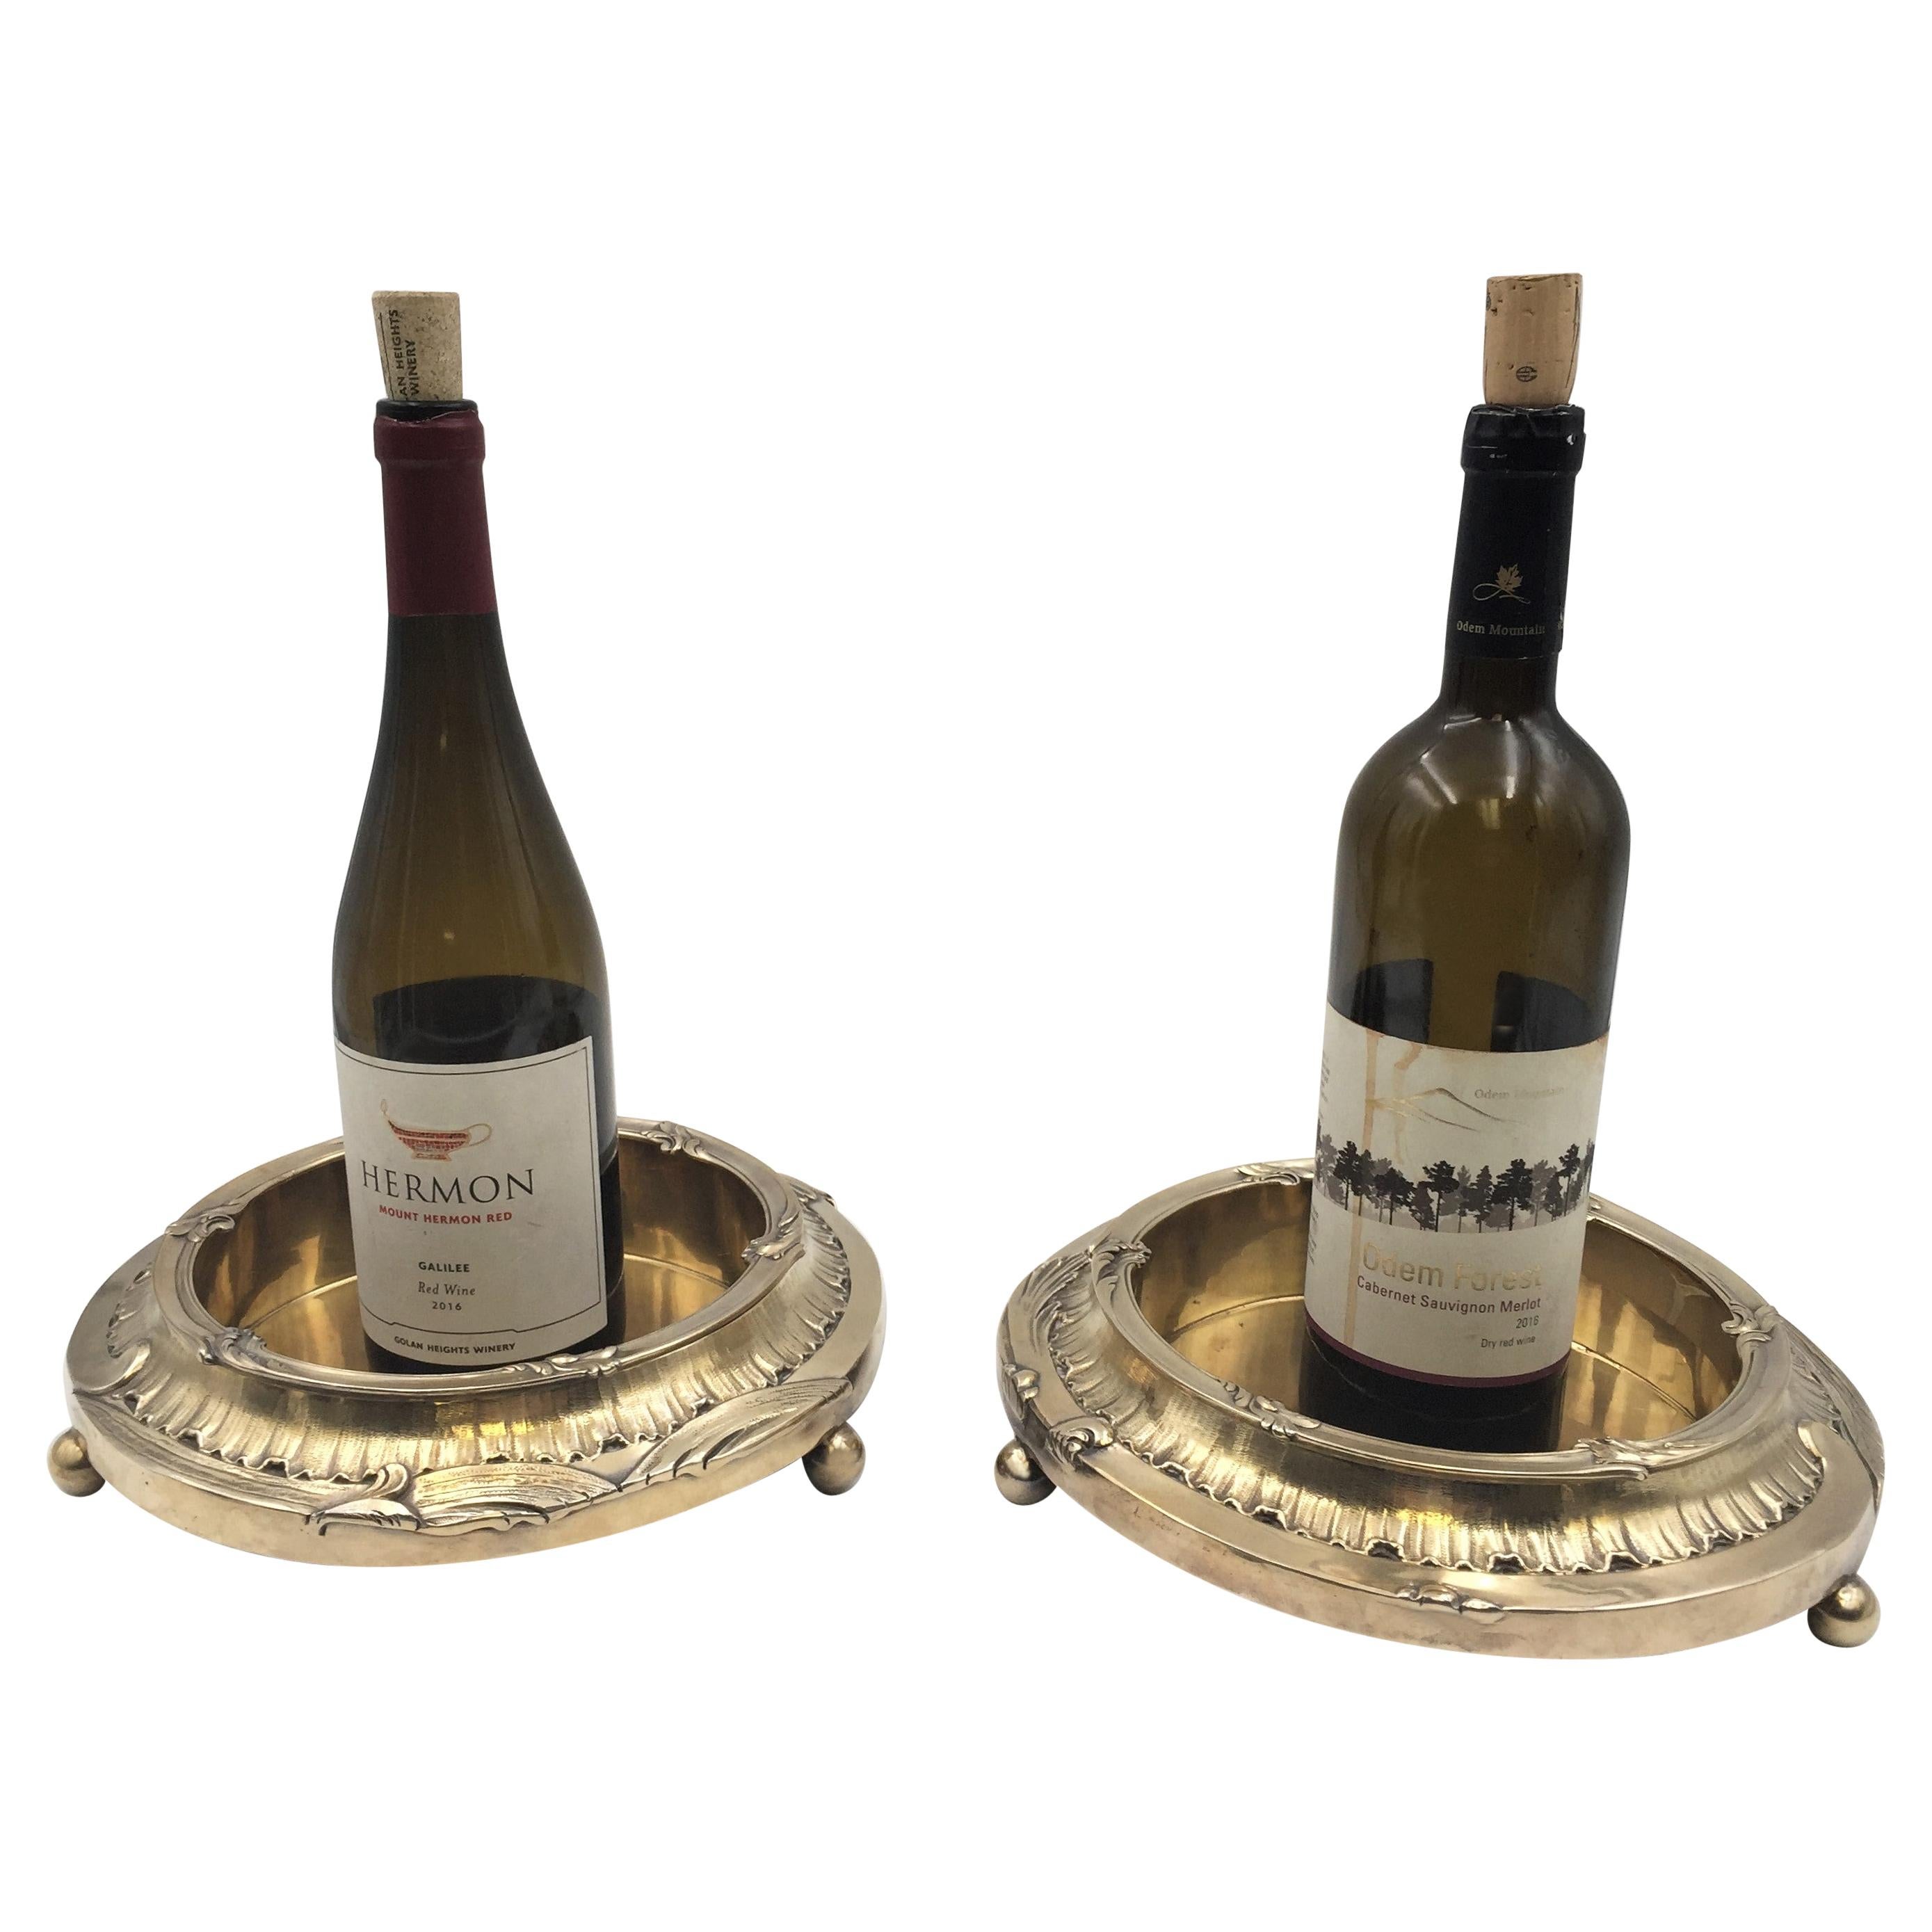 Pair of French Gilt Silver Magnum Bottle Coasters from the JP Morgan Collection